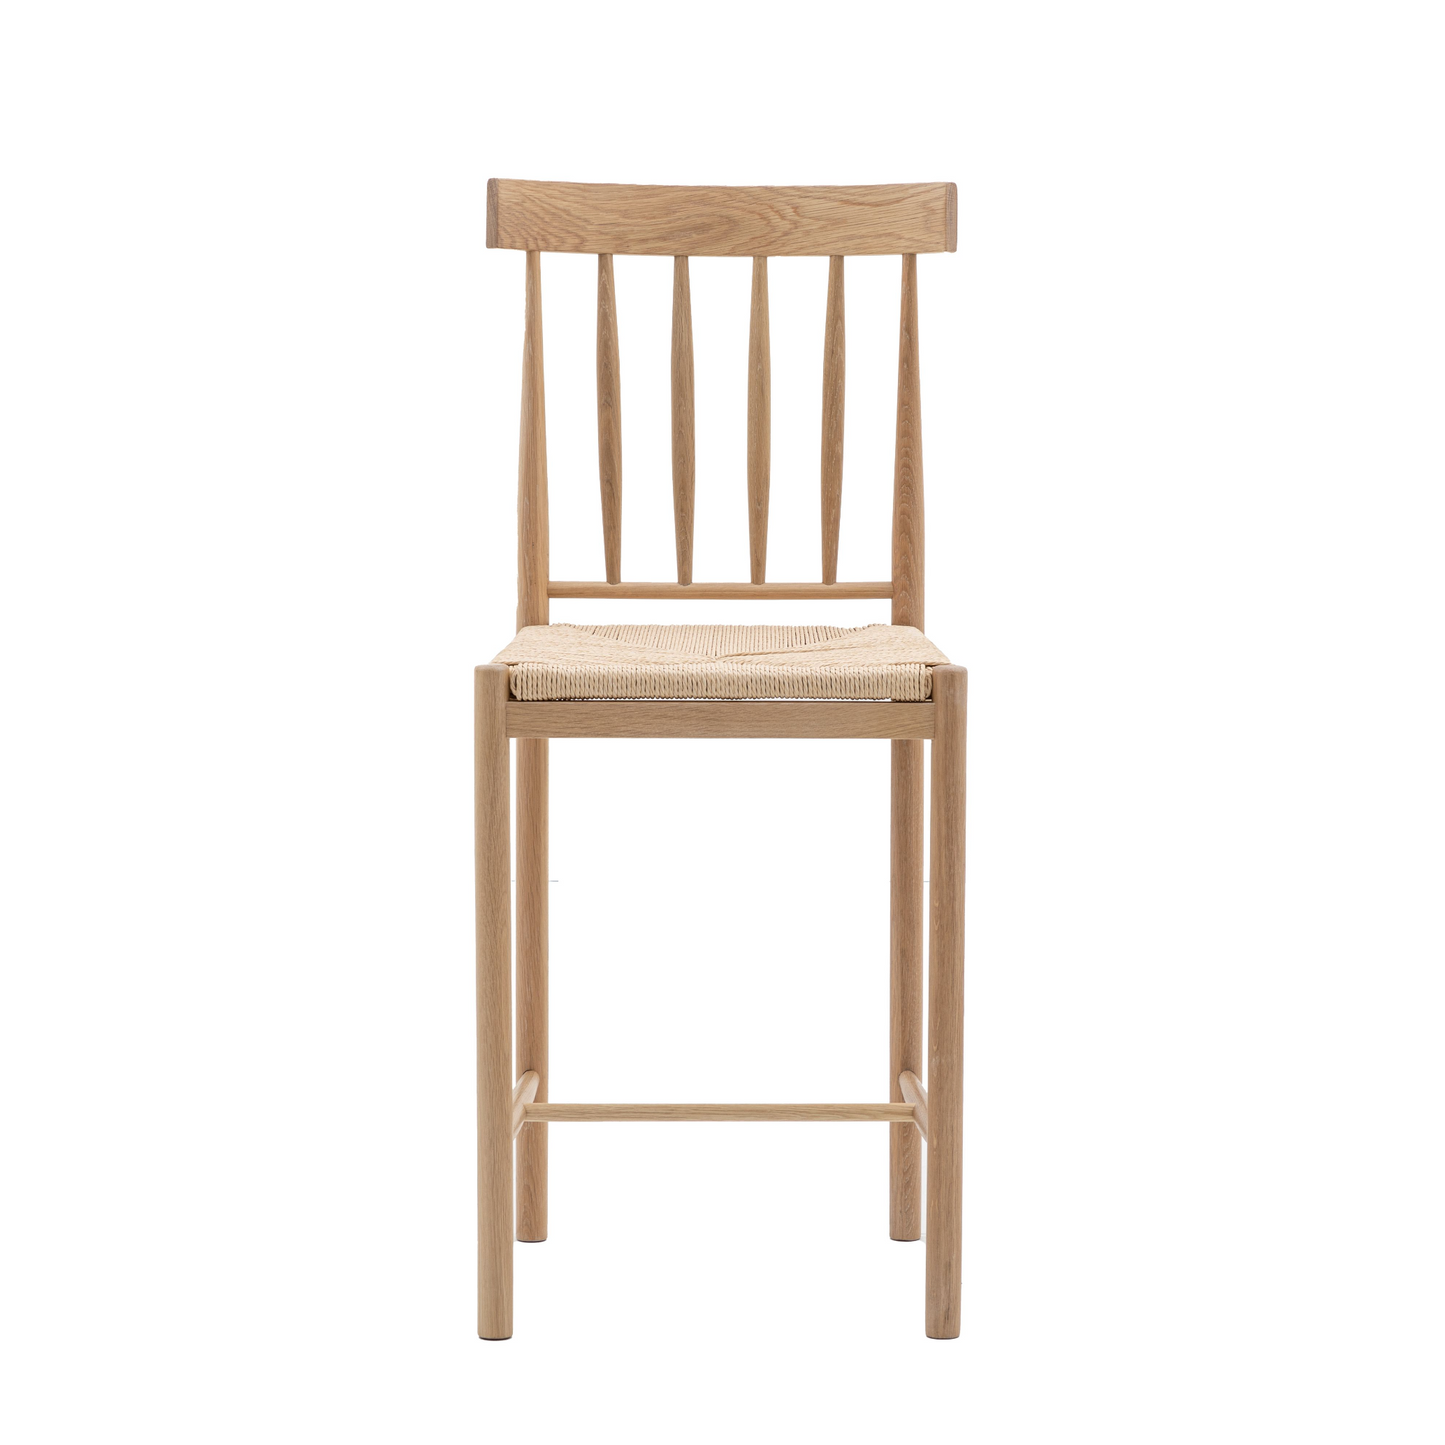 Home furniture, interior decor - A 2pk of Buckland Bar Stools with wooden seats, available from Kikiathome.co.uk.